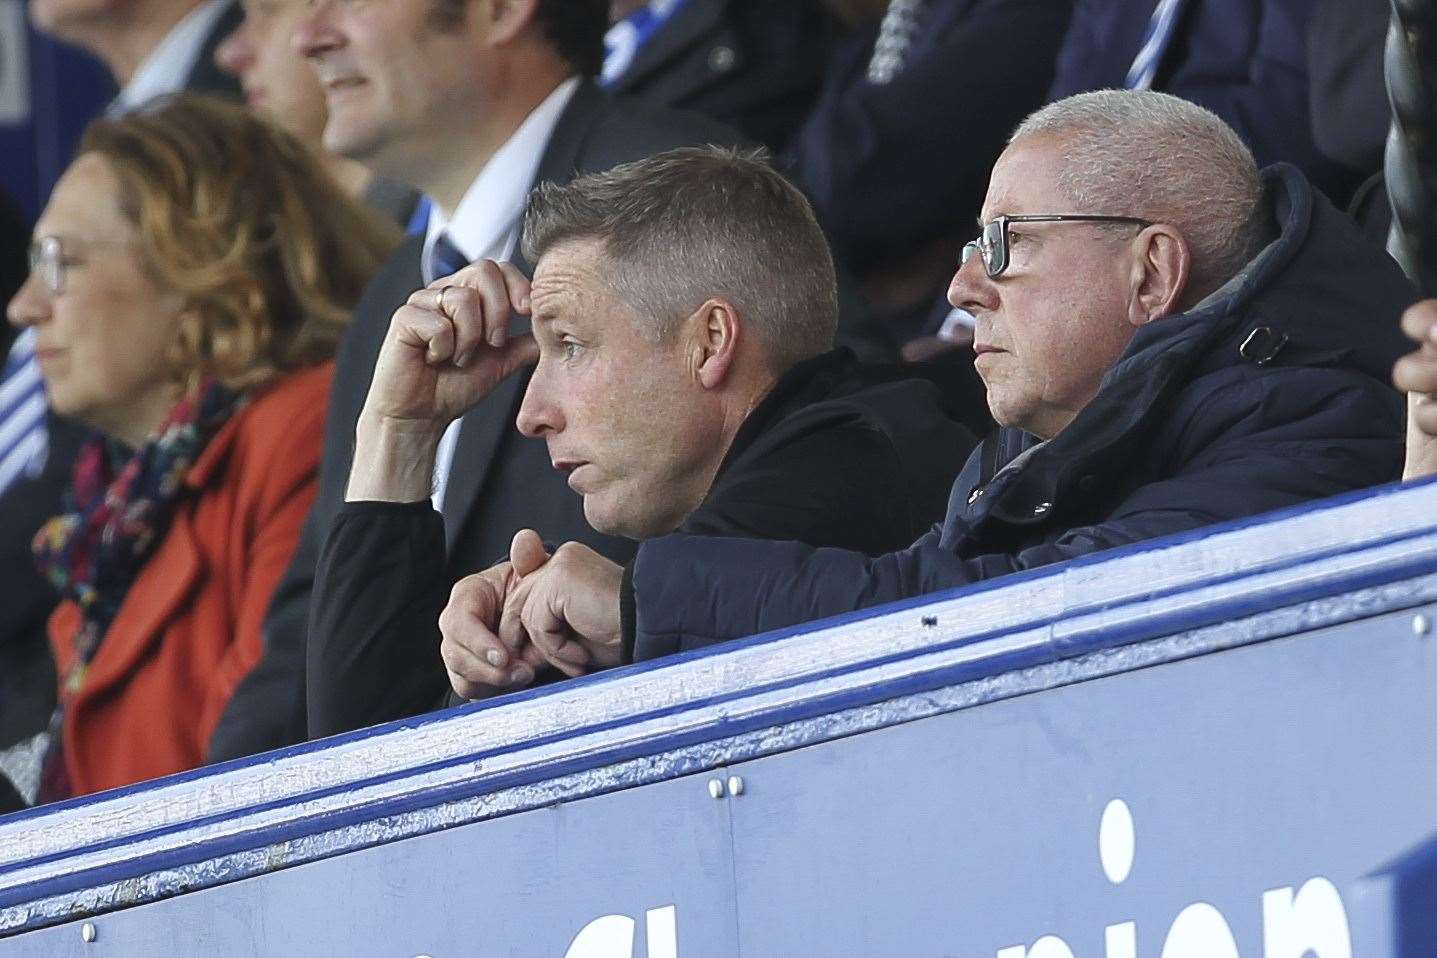 Neil Harris and Paul Scally watch on at Portsmouth last season. The Gills manager says personal abuse is wrong after Scally's long battle against abusers. Picture: KPI